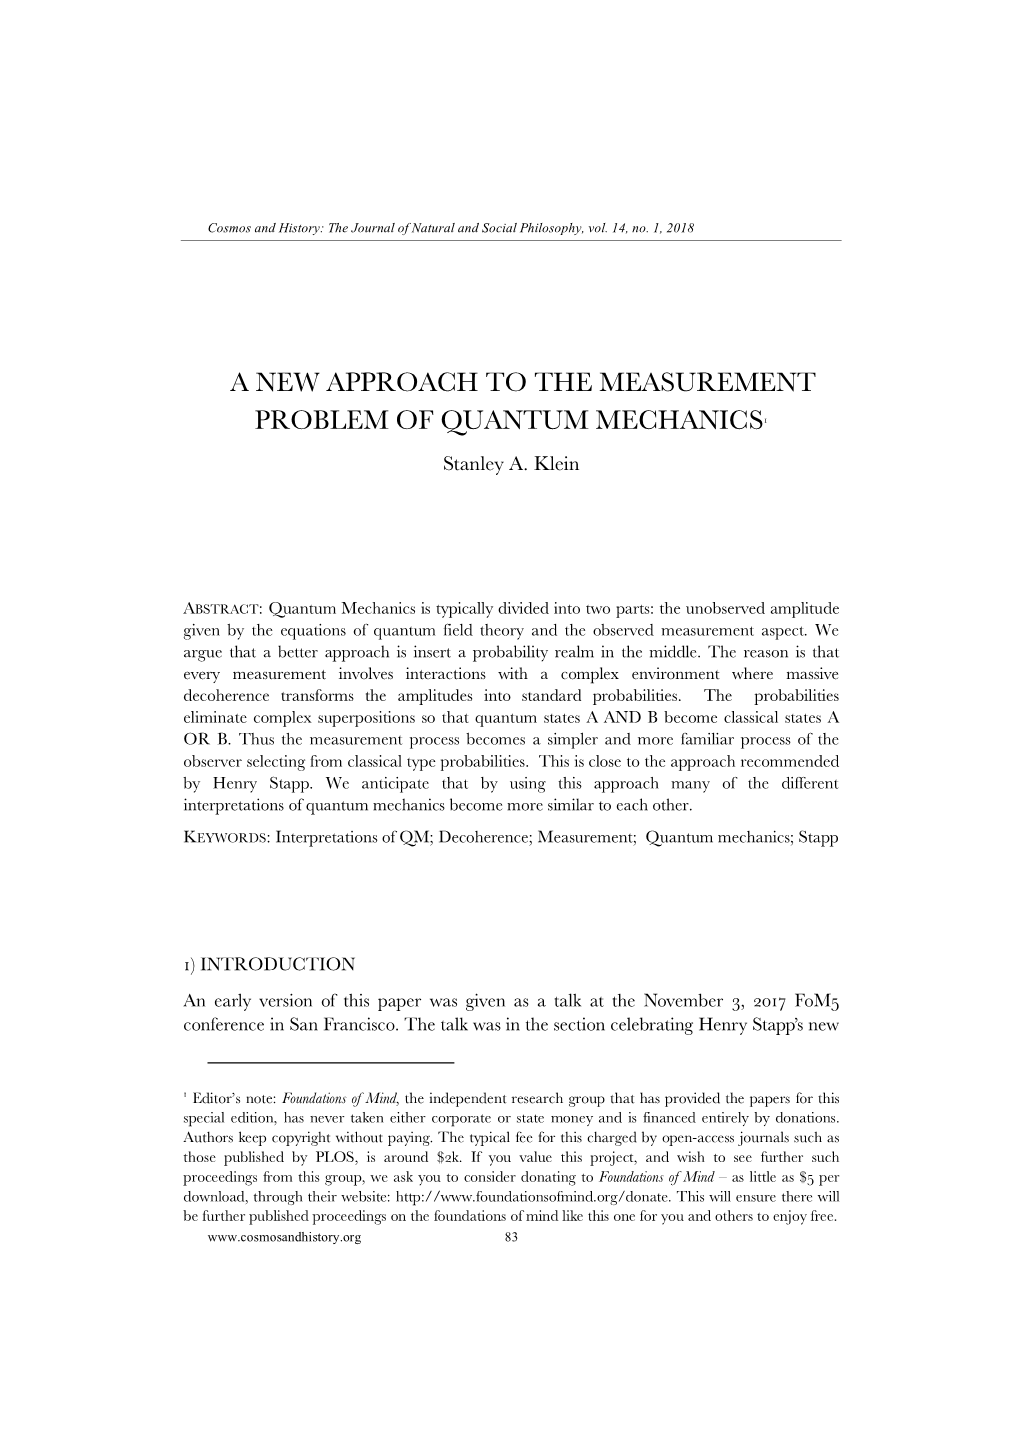 A NEW APPROACH to the MEASUREMENT PROBLEM of QUANTUM MECHANICS1 Stanley A